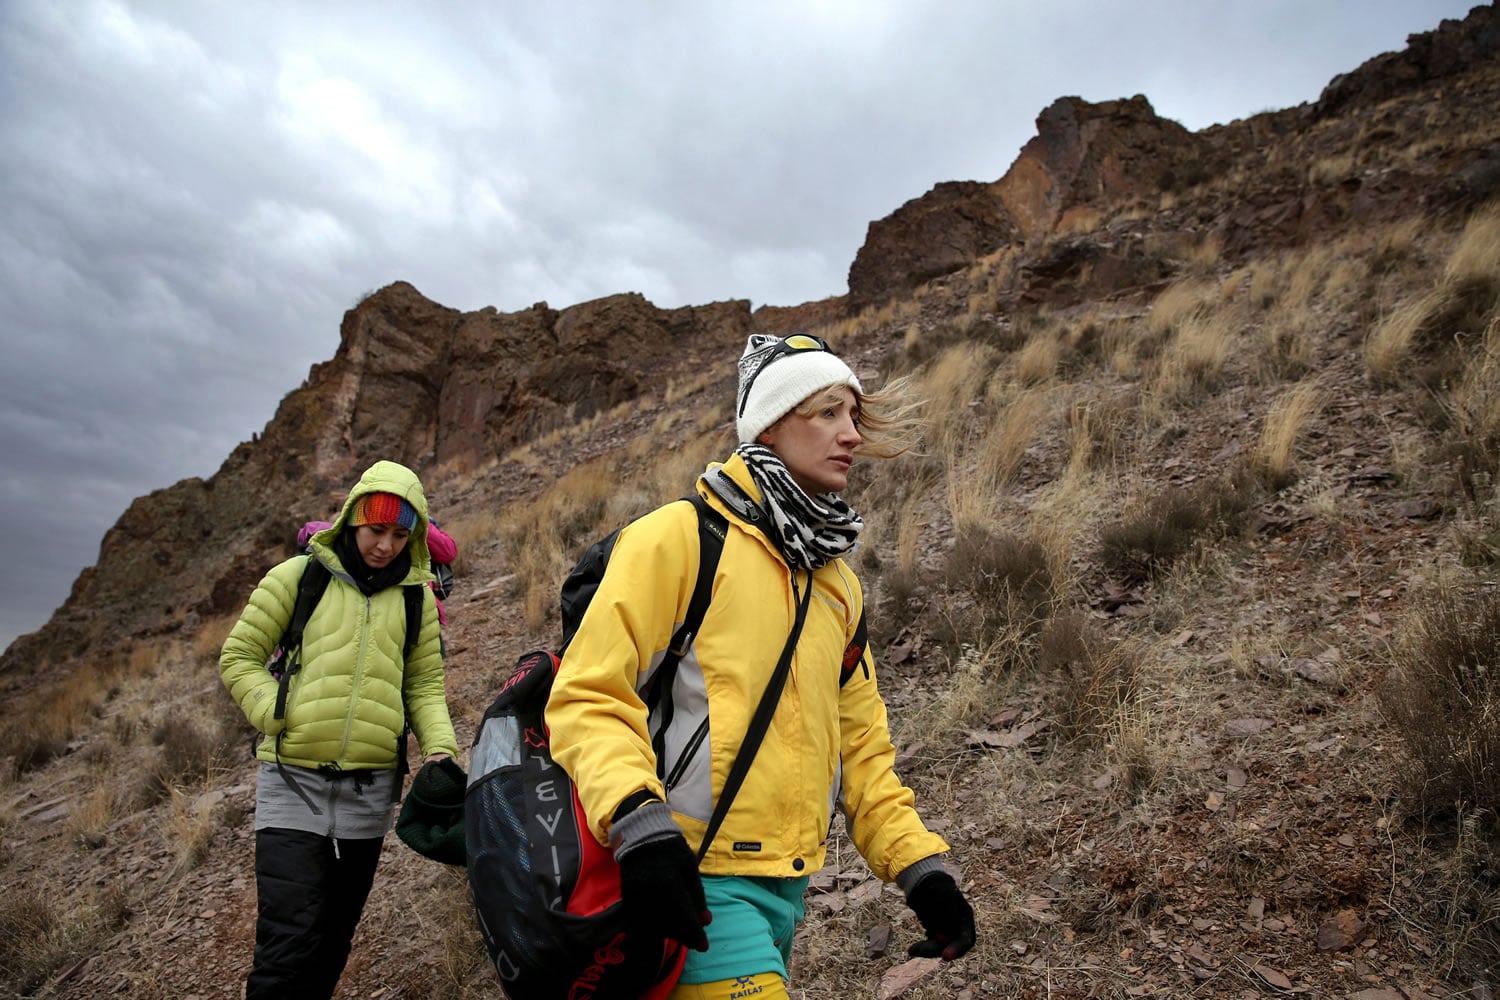 Iranian rock climber, Farnaz Esmaeilzadeh, center, approaches cliffs in a mountainous area outside the city of Zanjan, some 330 kilometers (207 miles) west of the capital Tehran, Iran. Esmaeilzadeh, 27, who has been climbing since she was 13, has distinguished herself in international competitions despite the barriers she faces as a female athlete in conservative Iran.